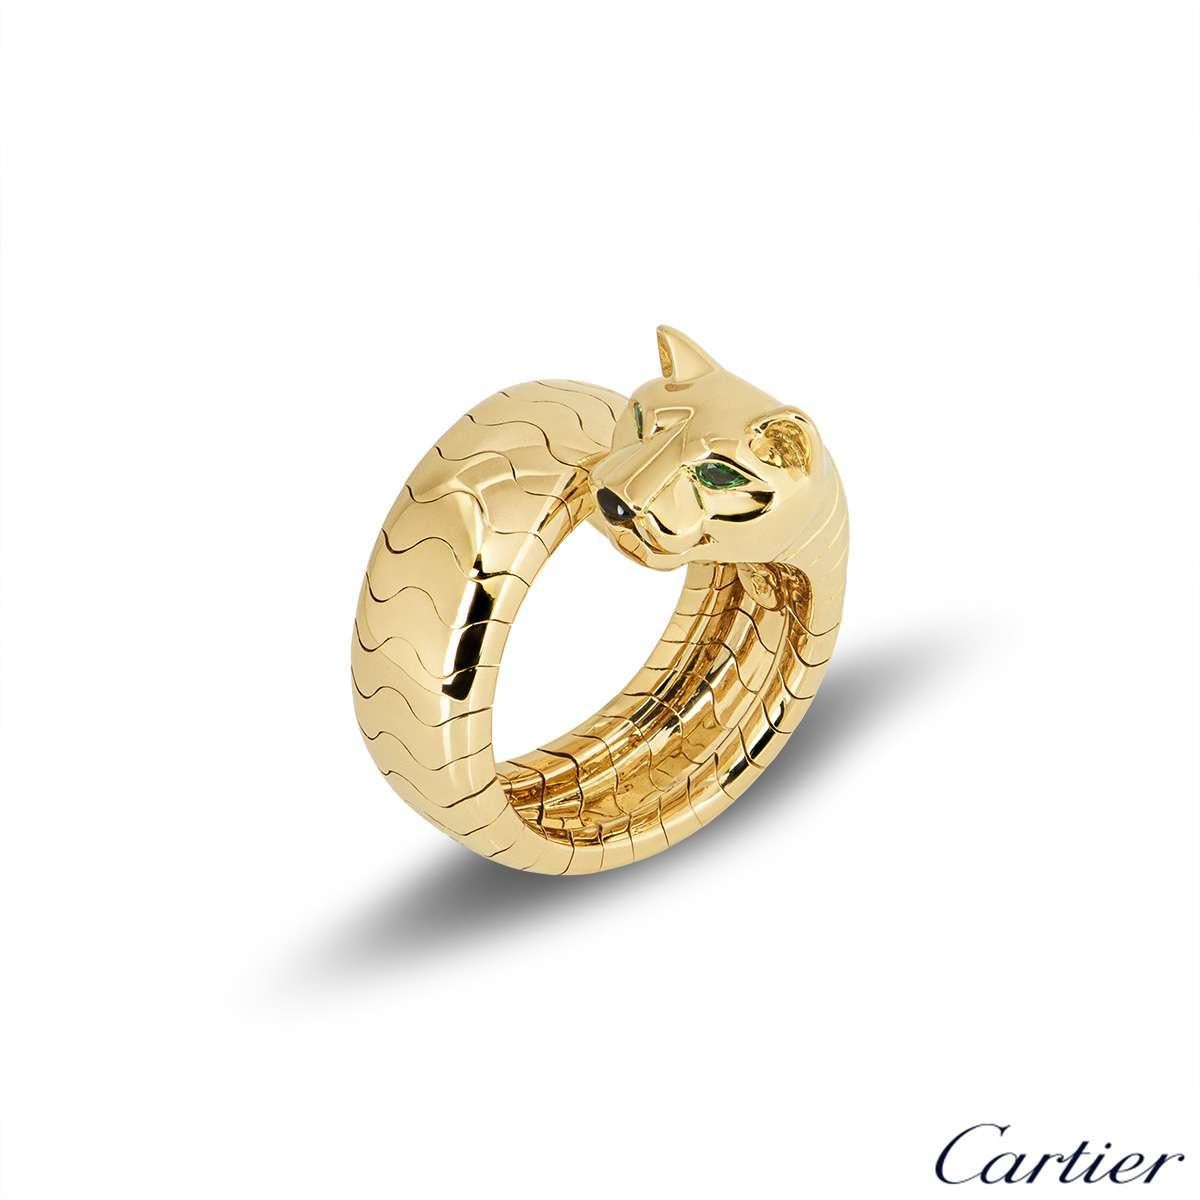 An 18k yellow gold ring from the Panthere collection by Cartier. The ring comprises of a Panthere head motif, set with tsavorite eyes and onyx nose. The body of the Panthere wraps around to form the band of the ring, measuring approximately 8mm in